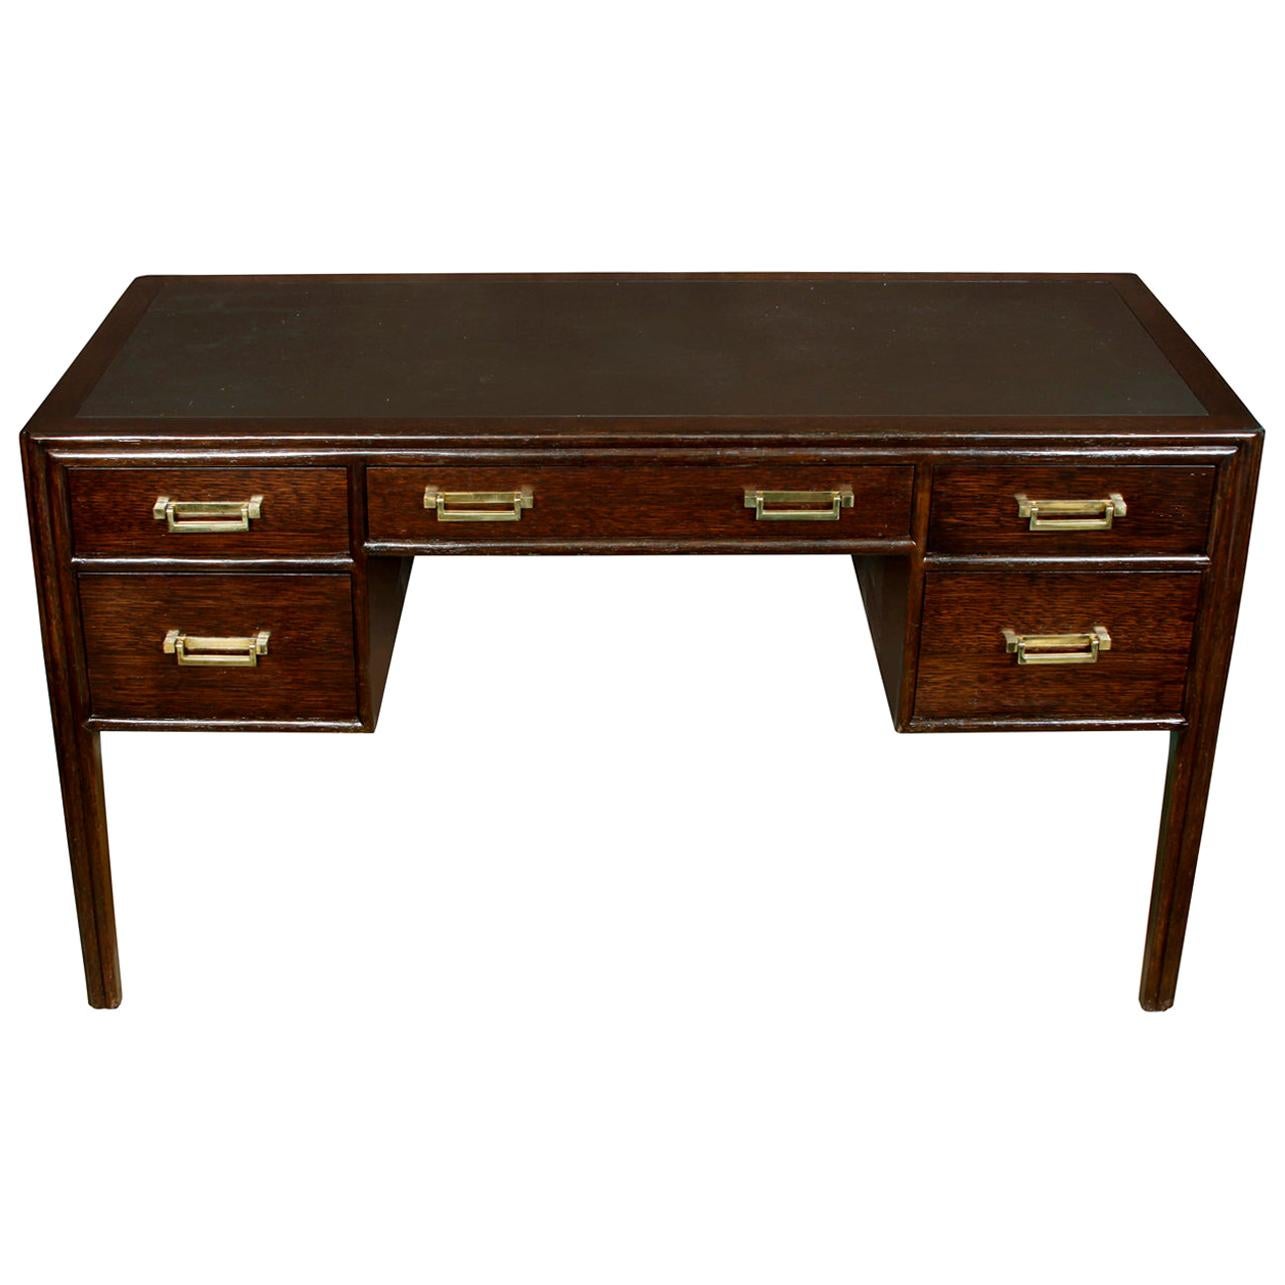 Vintage signed McGuire Campaign wood desk with rattan detail.